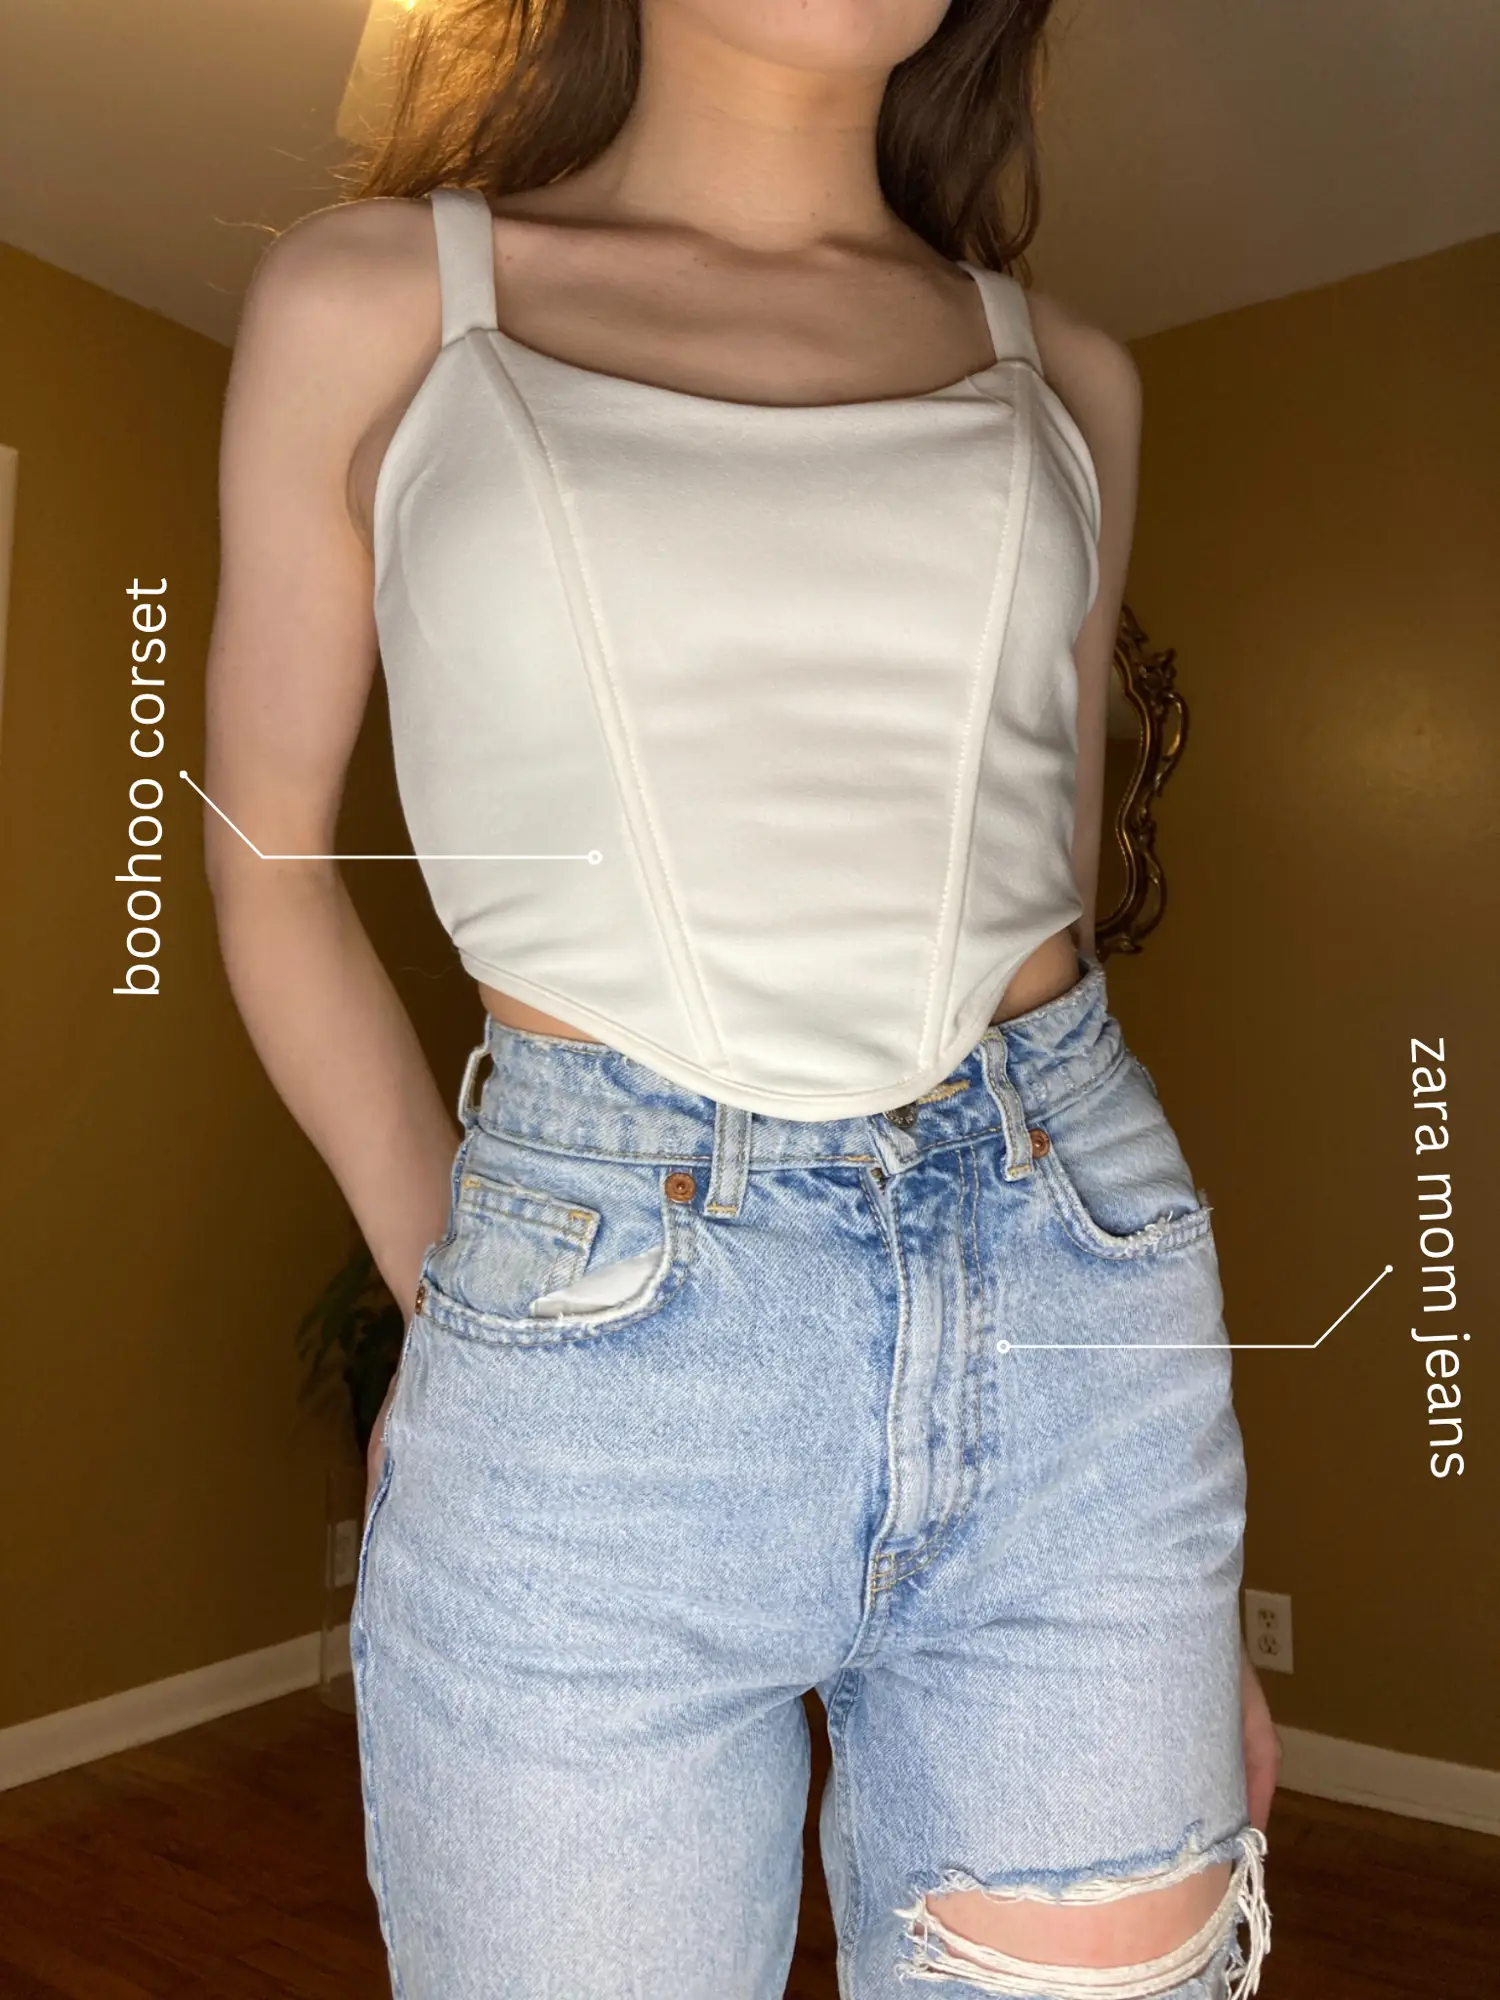 Cute tops: Small chest edition 💕, Gallery posted by Ressa Rose ♡